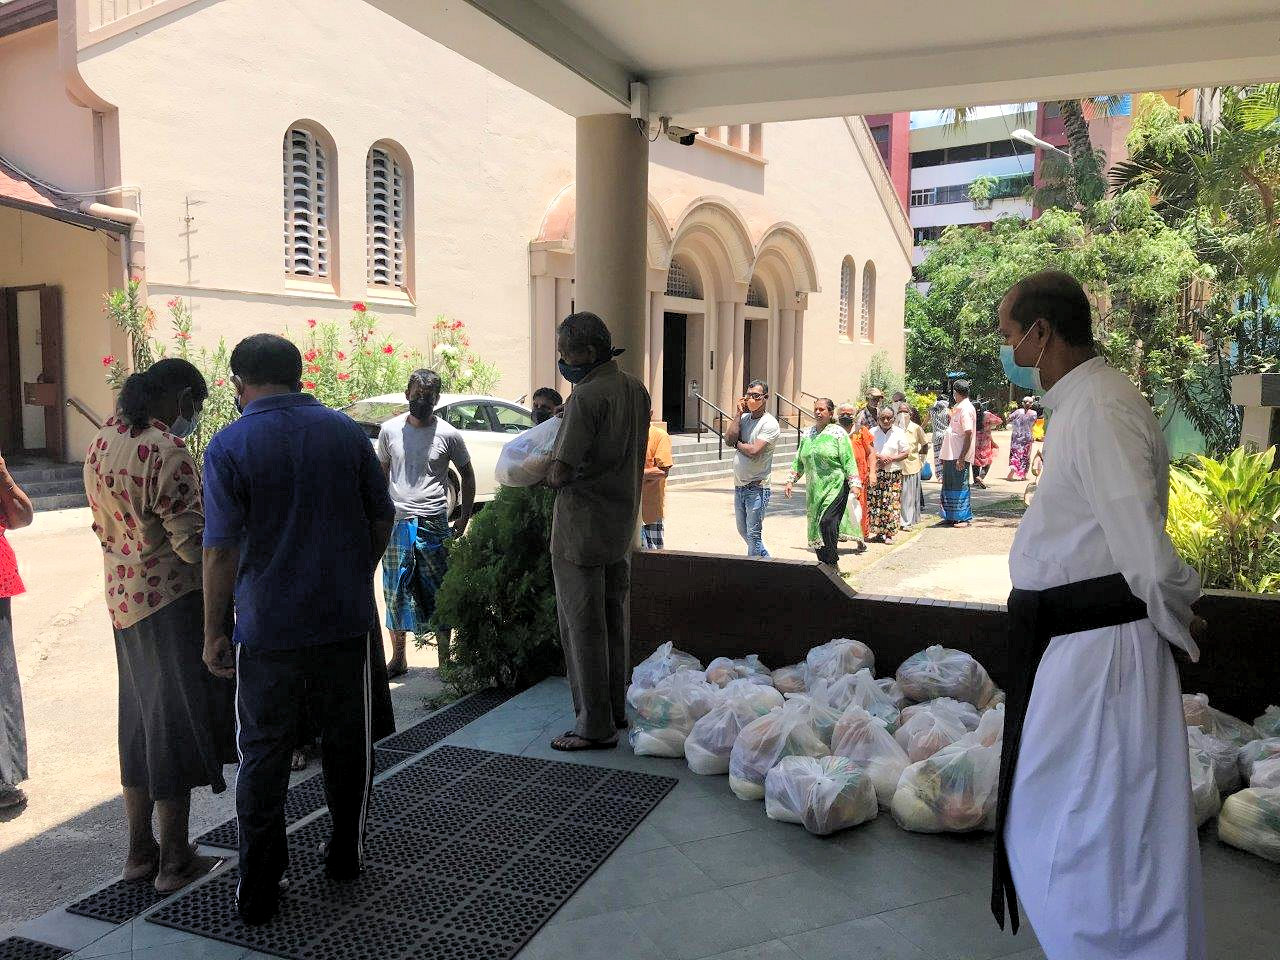 Father Dilan supervising the distribution of your care packages on Tuesday 7/4/20